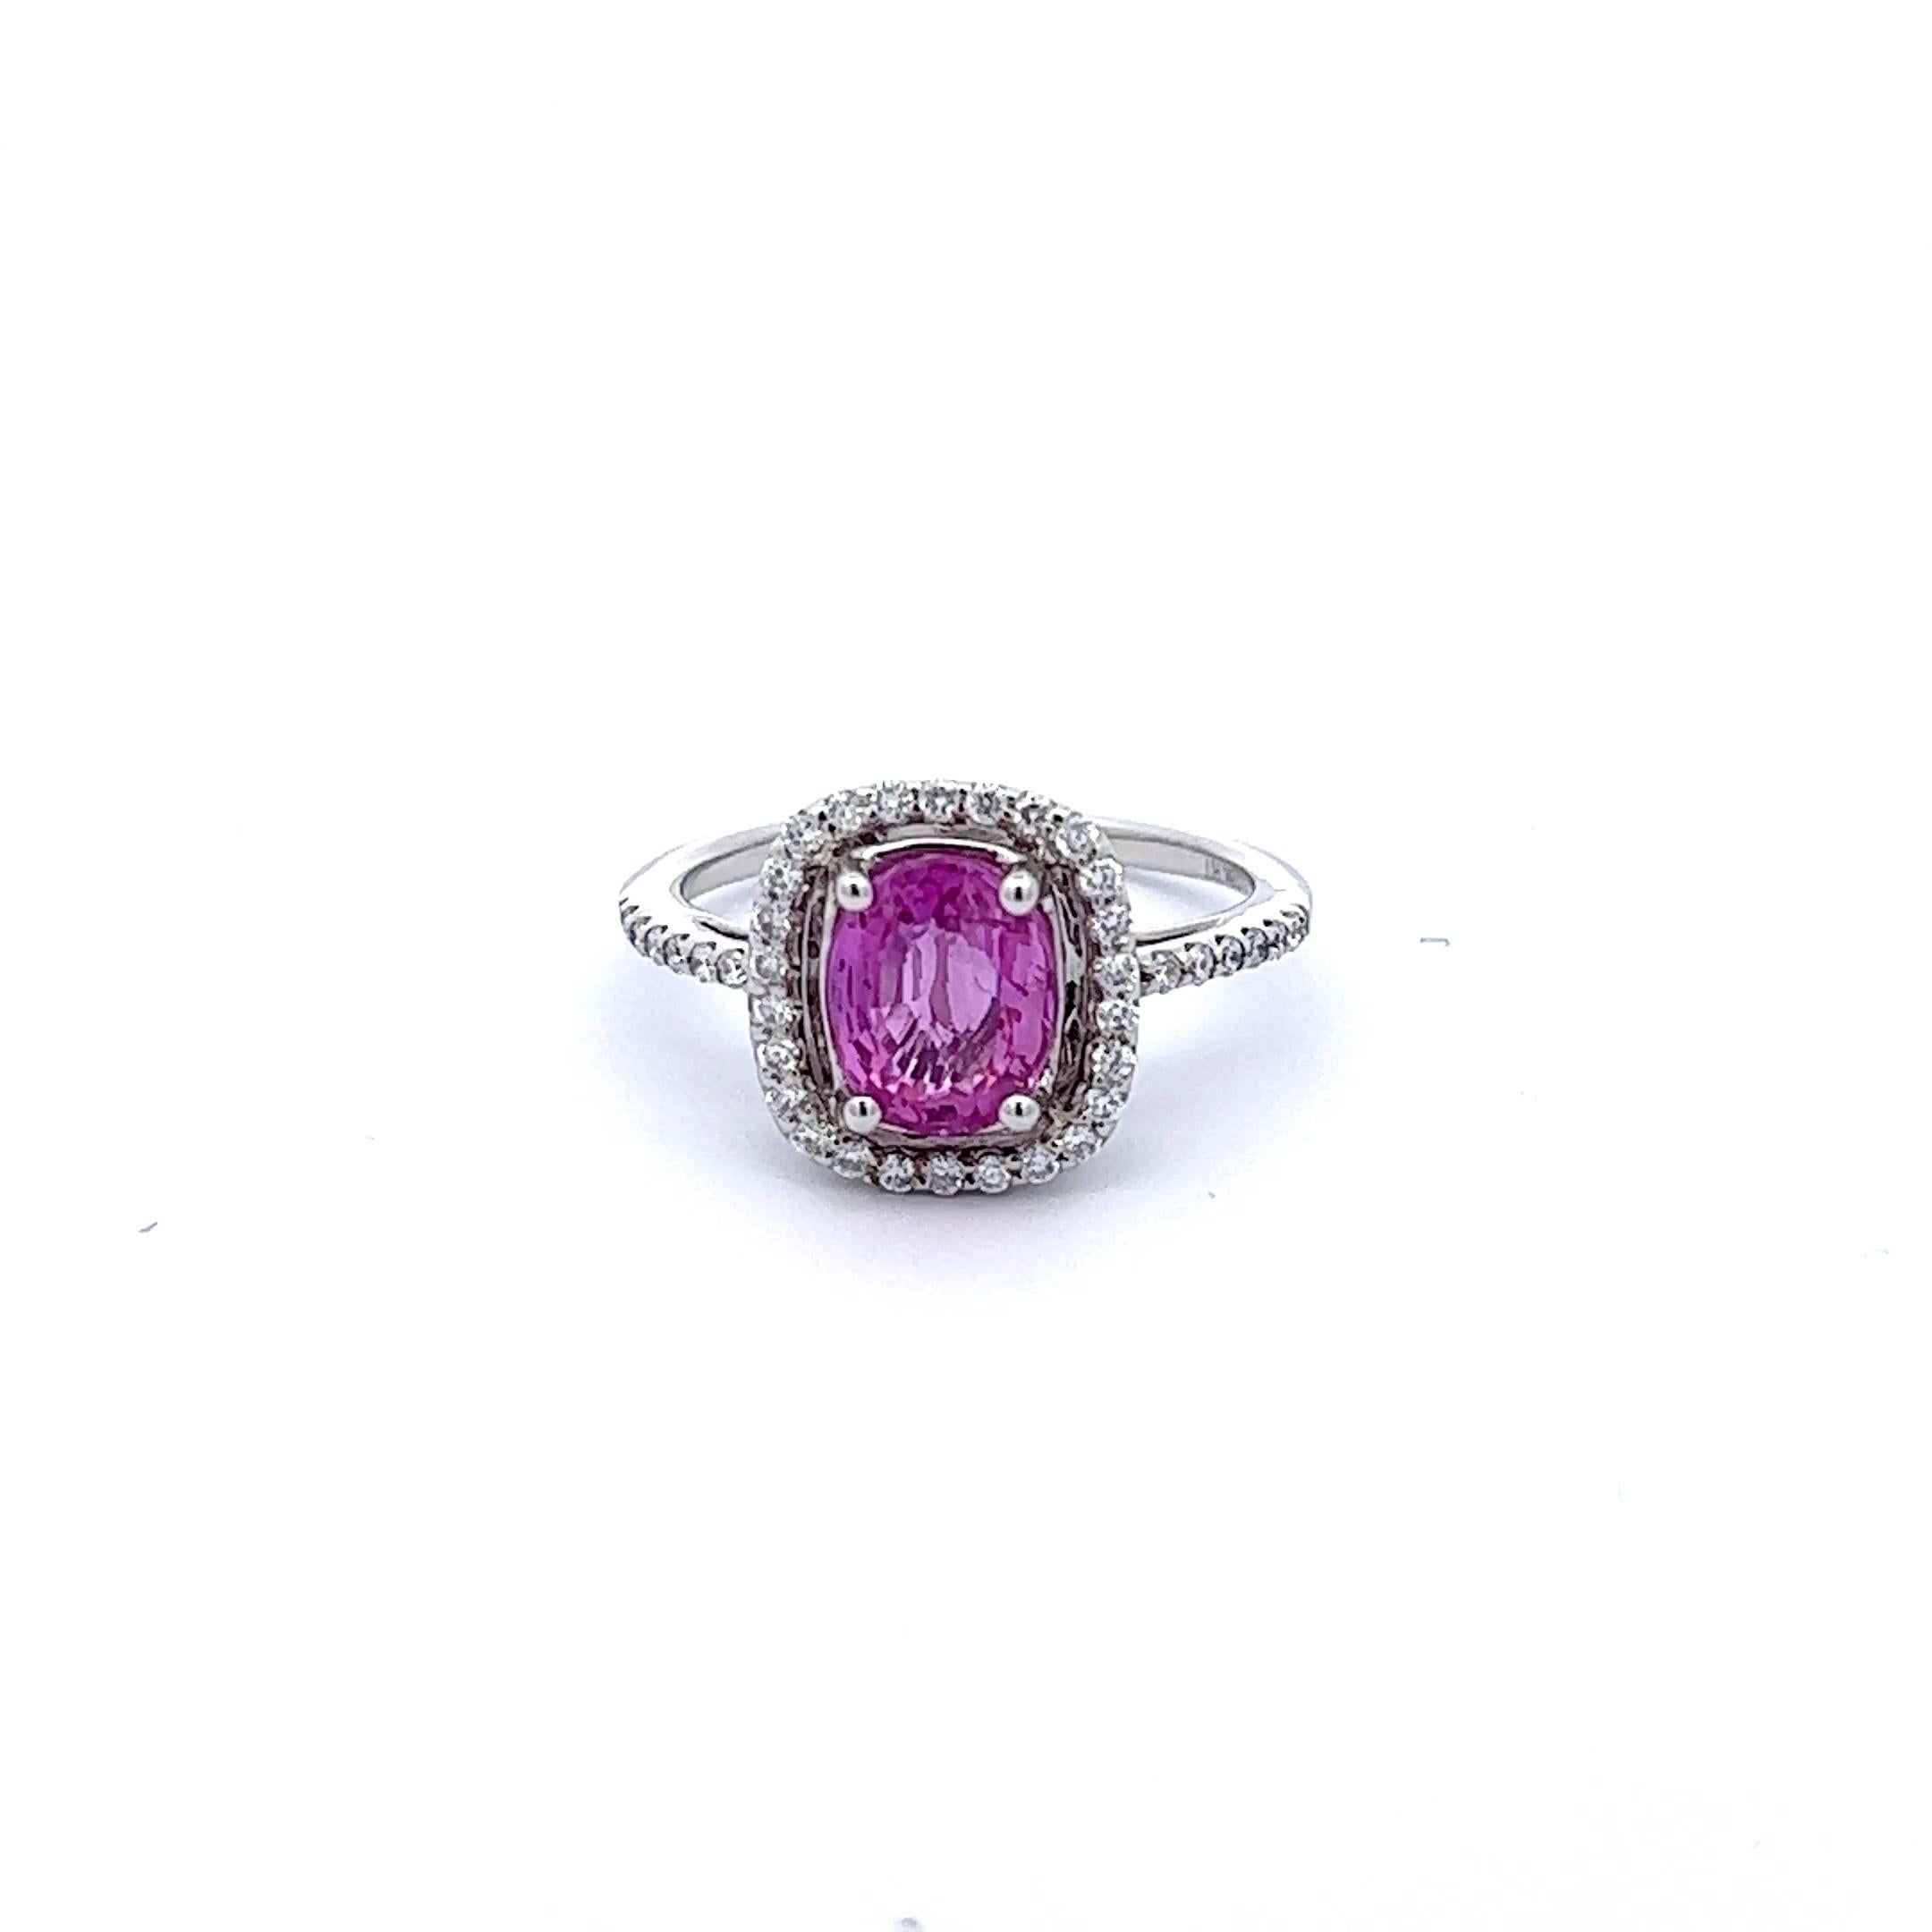 Introducing the stunning 2.32 carat Pink Sapphire Ring, an exceptional piece of jewelry that exudes elegance and grace. The centerpiece of this ring is a rare, natural pink sapphire, weighing in at an impressive 2.32 carats. The sapphire is set in a